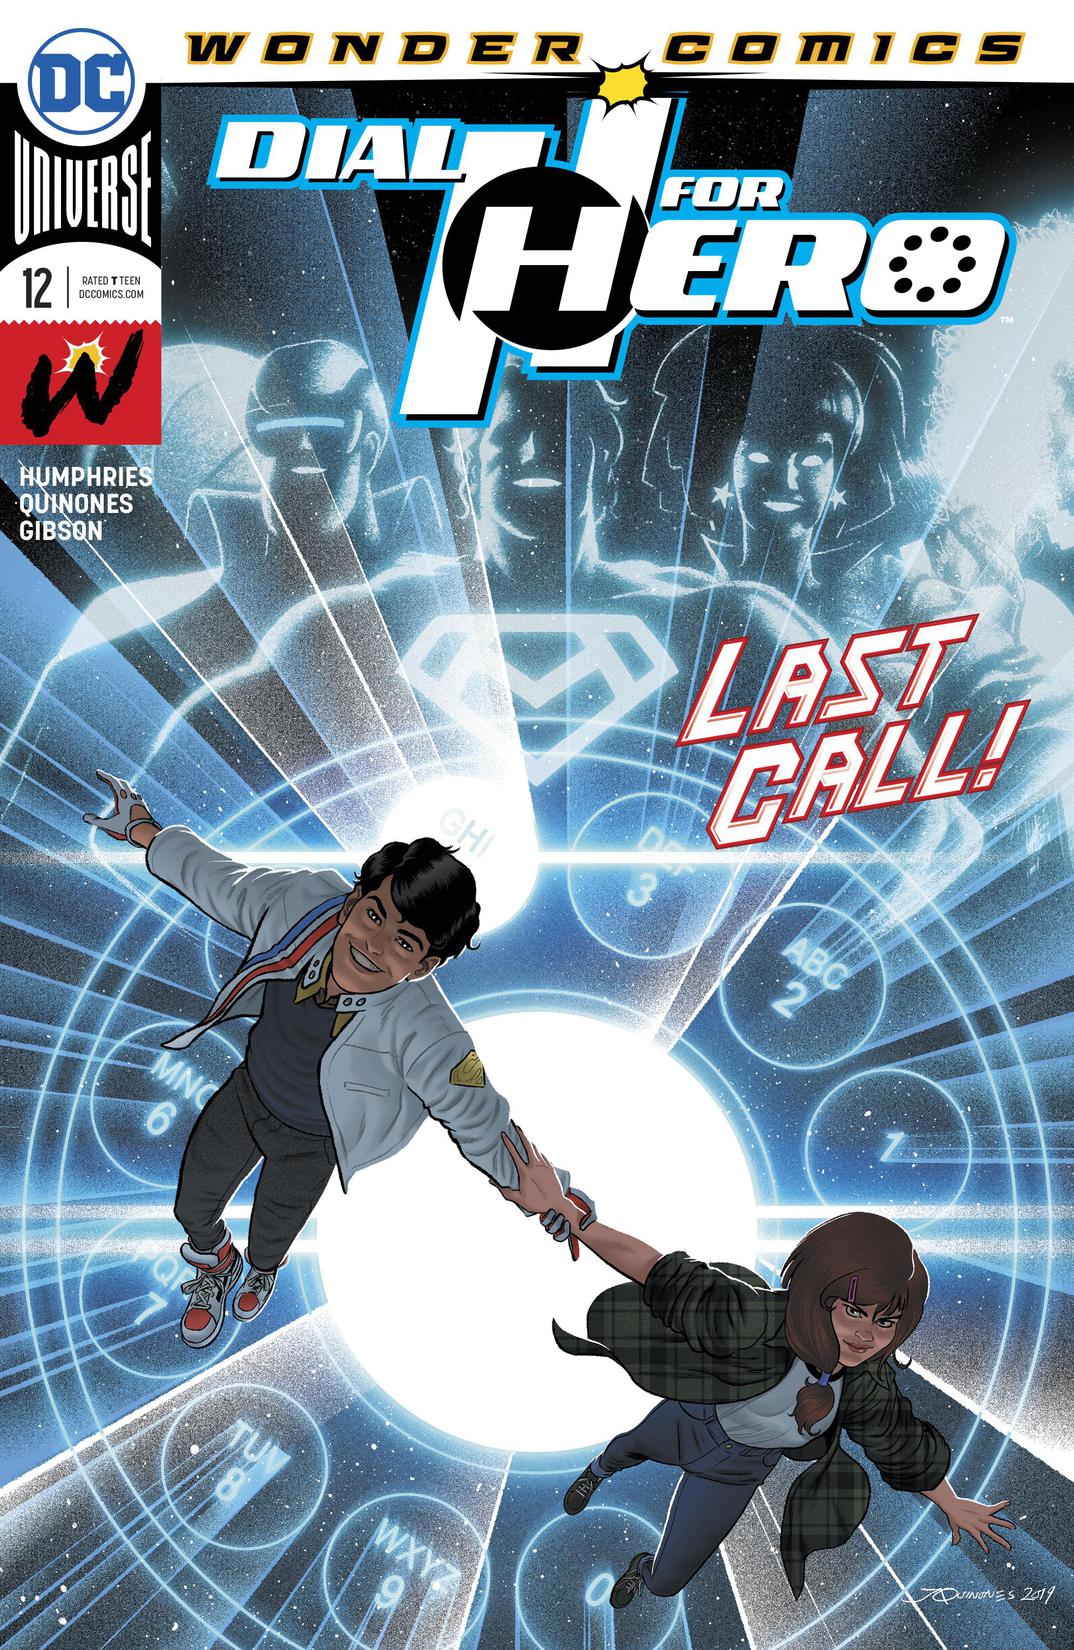 Dial H for Hero (2019-2020) #12 preview images